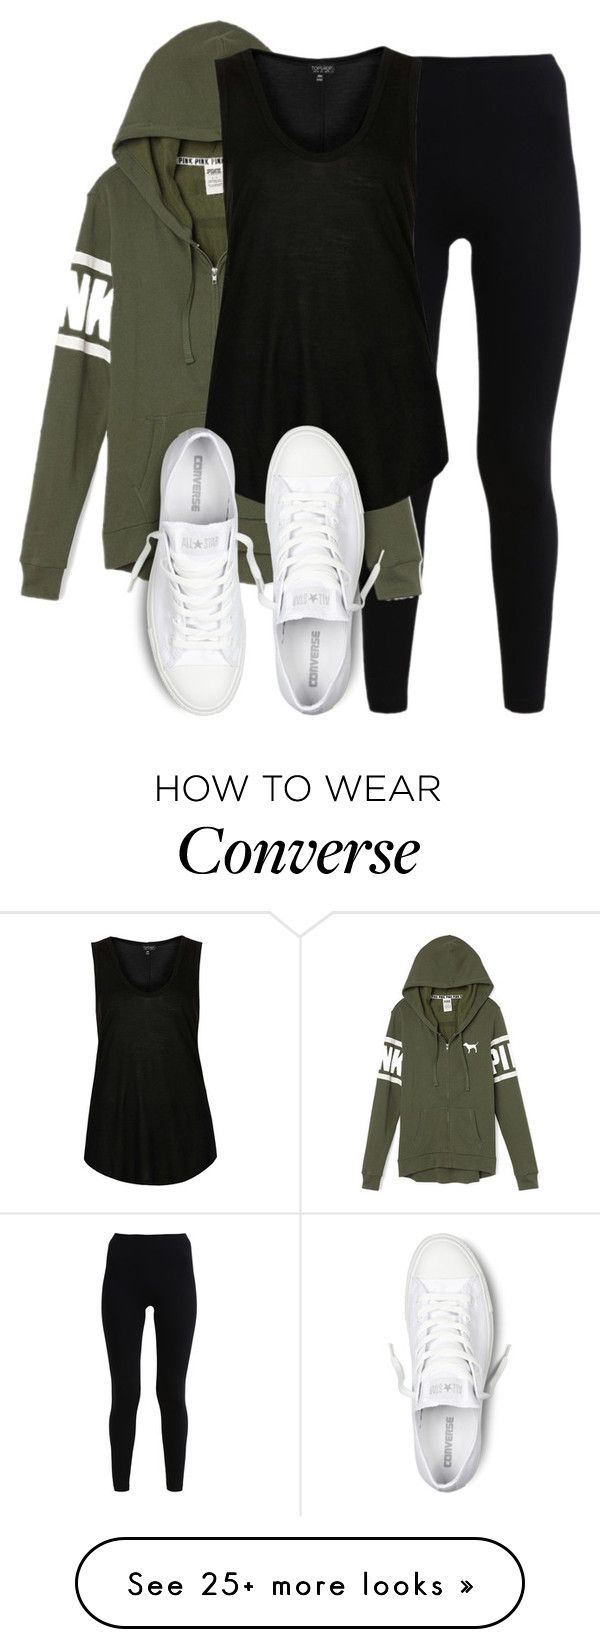 “perrie insp” by littlemixmakeup on Polyvore featuring American Apparel, Victoria’s Secret, Topshop and Co